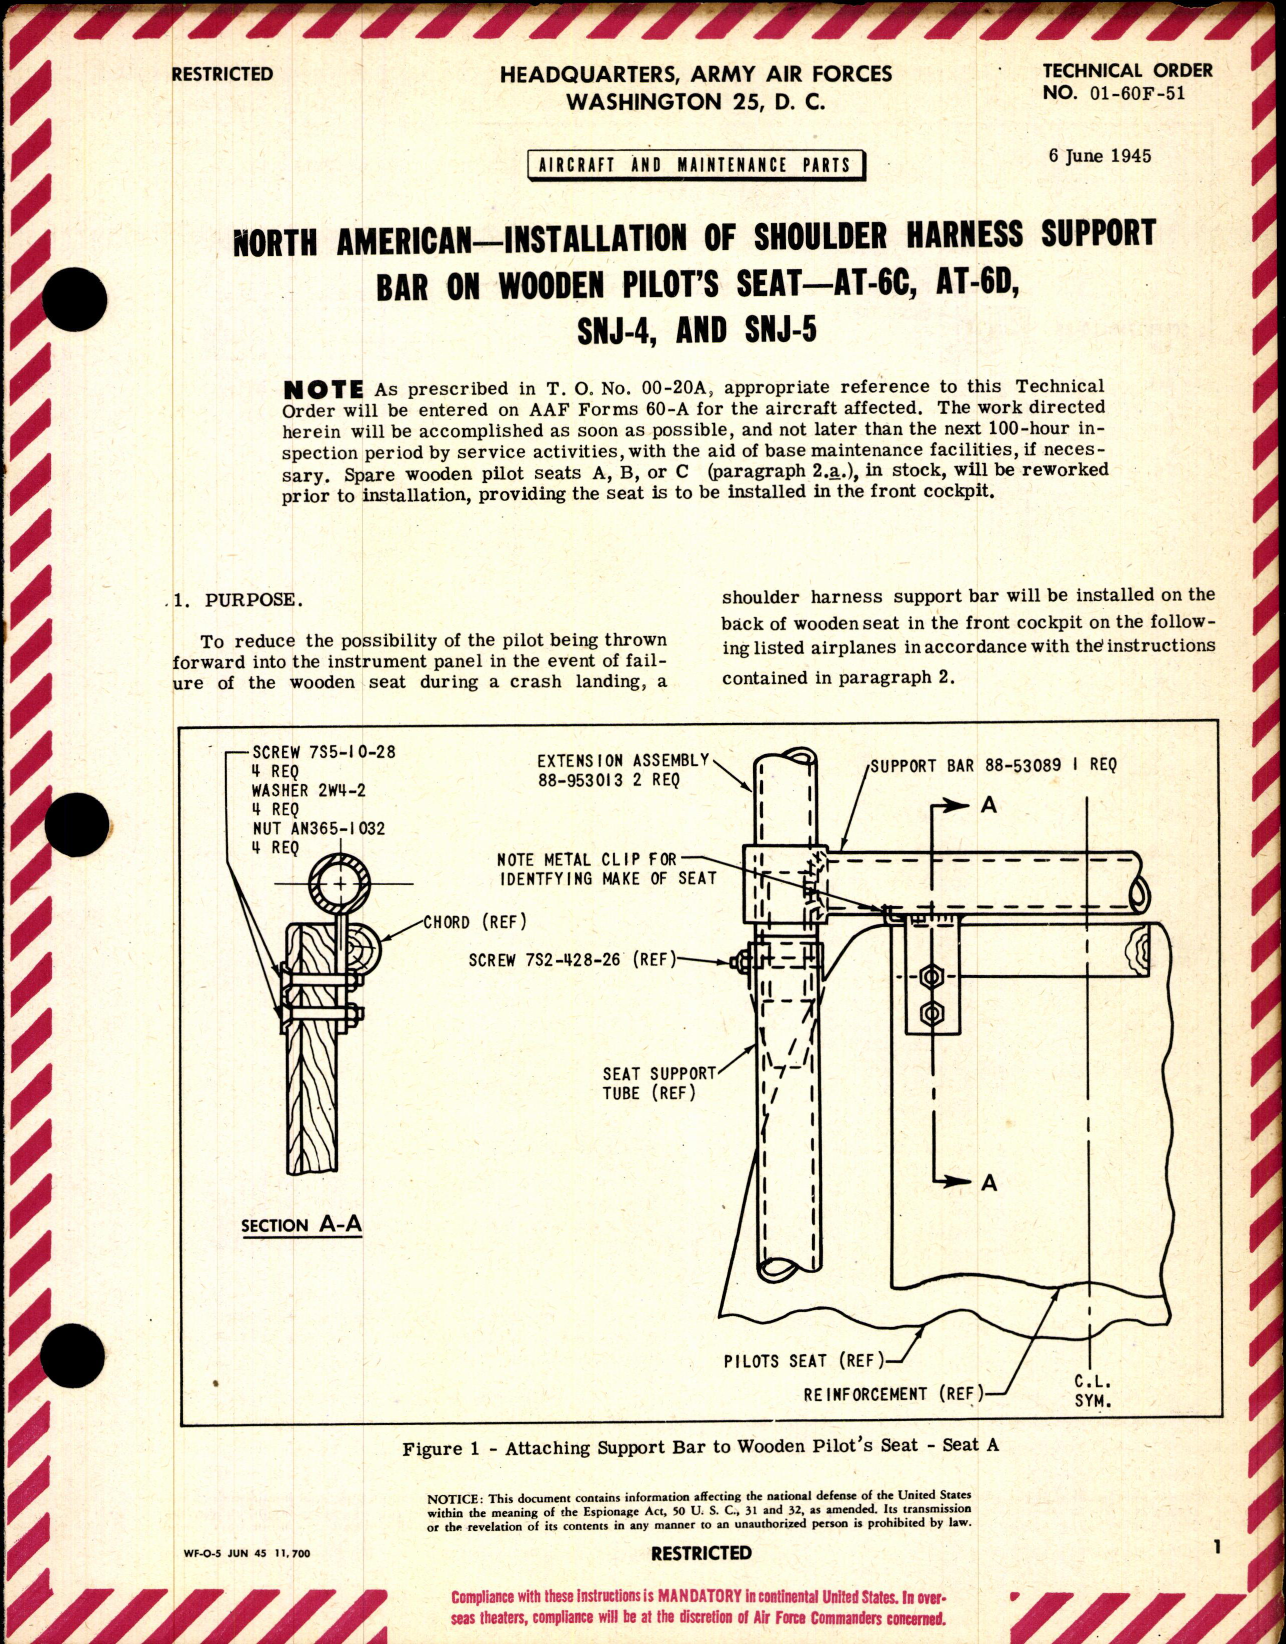 Sample page 1 from AirCorps Library document: Installation of Shoulder Harness Support Bar on Wooden Pilots Seat for AT-6C, AT-6D, SNJ-4, and SNJ-5